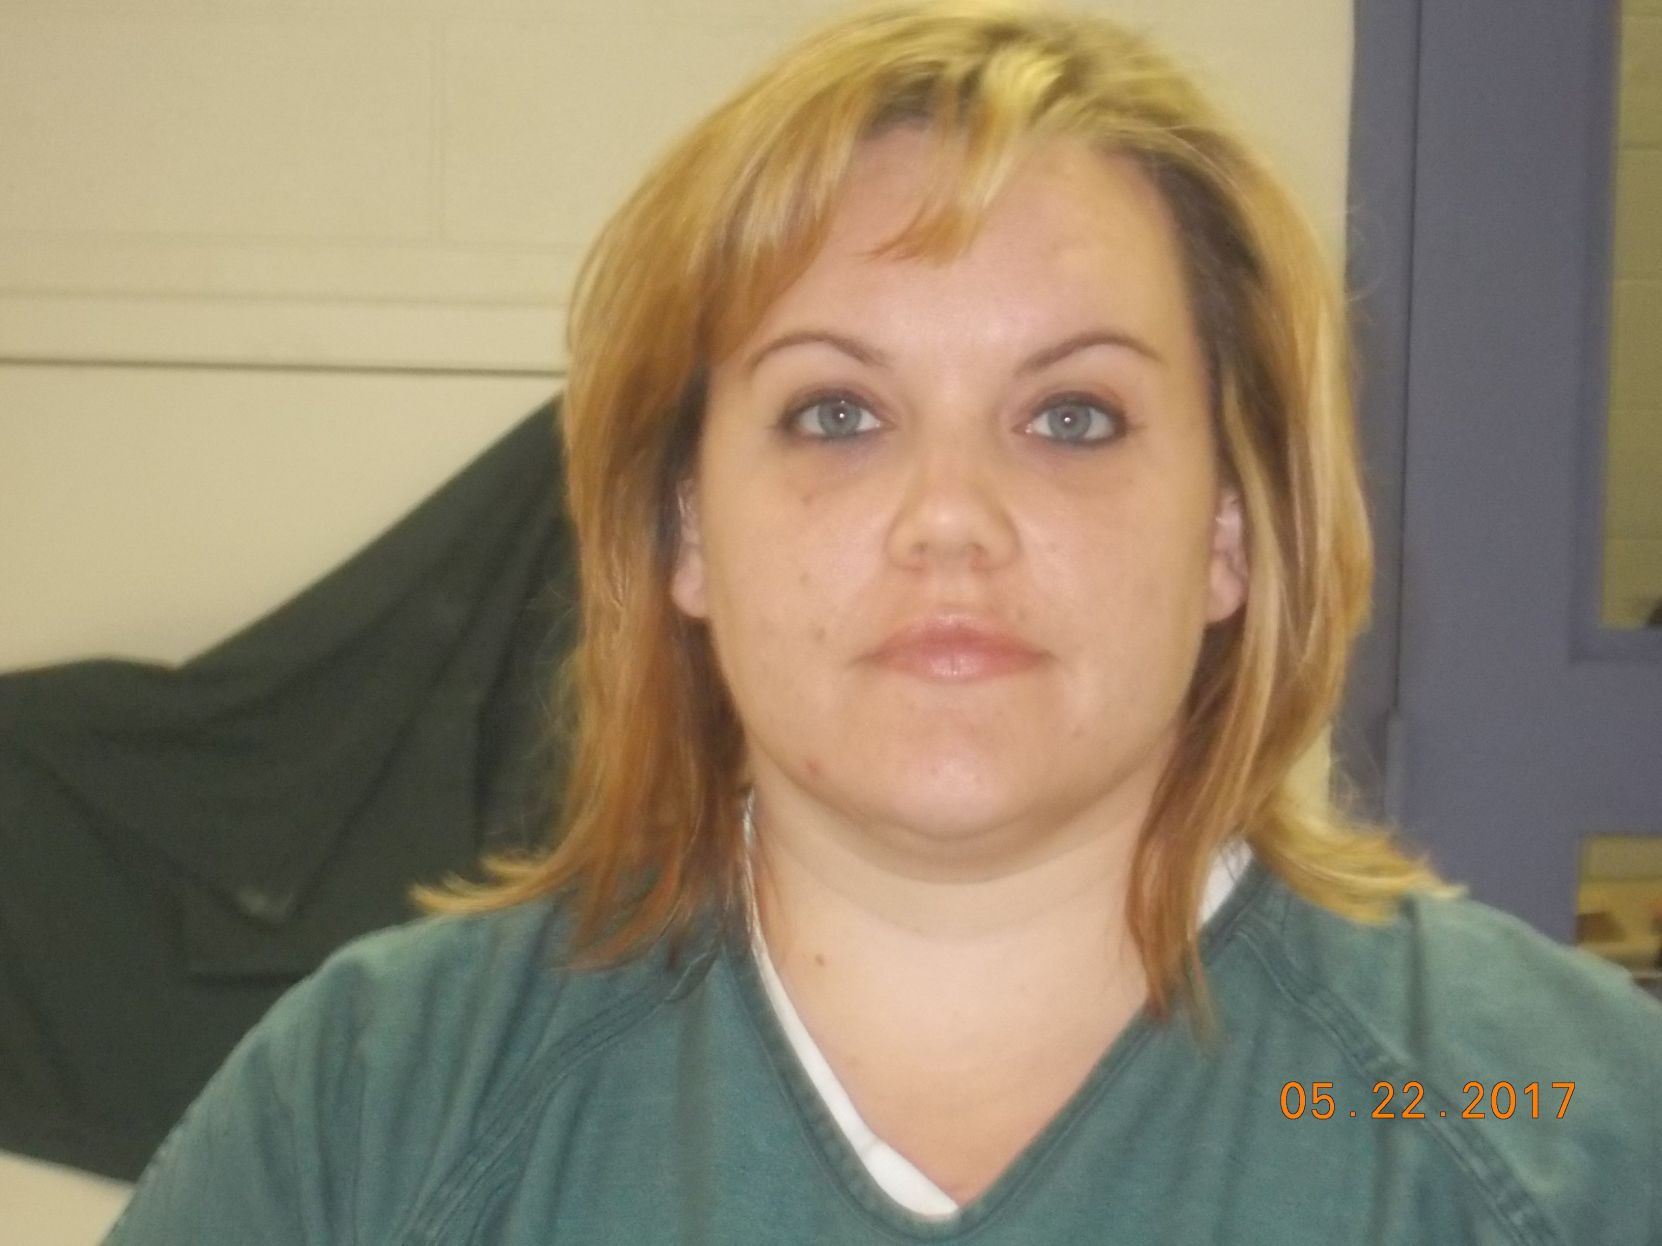 Meadville woman gets three-year sentence on heroin charges Local News meadvilletribune